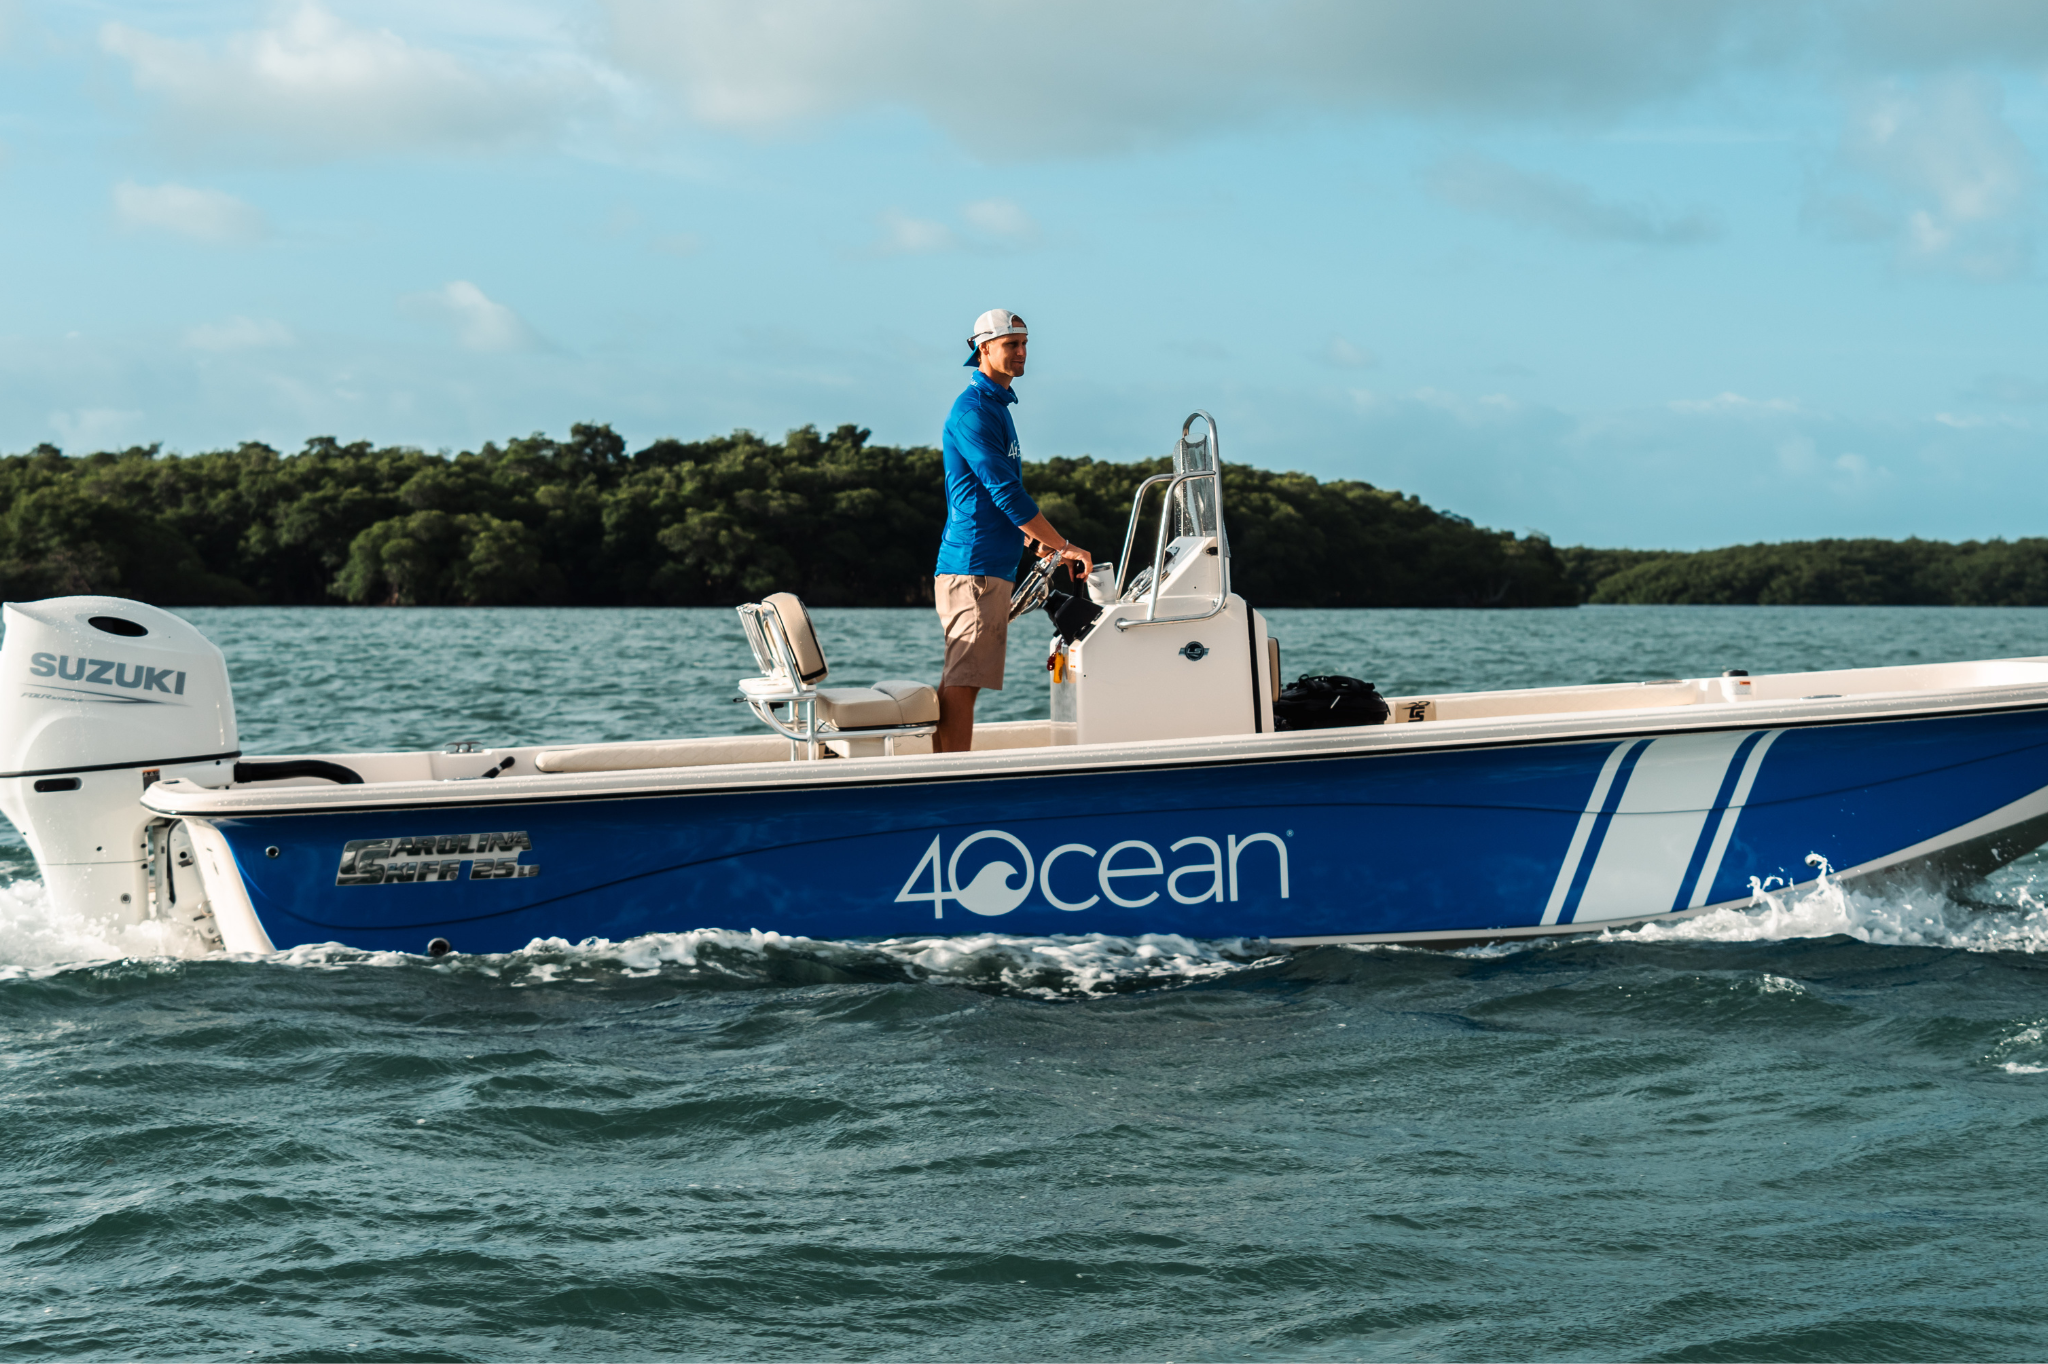 We are proud to announce a partnership that amplifies our commitment to environmental stewardship – joining forces with 4ocean.